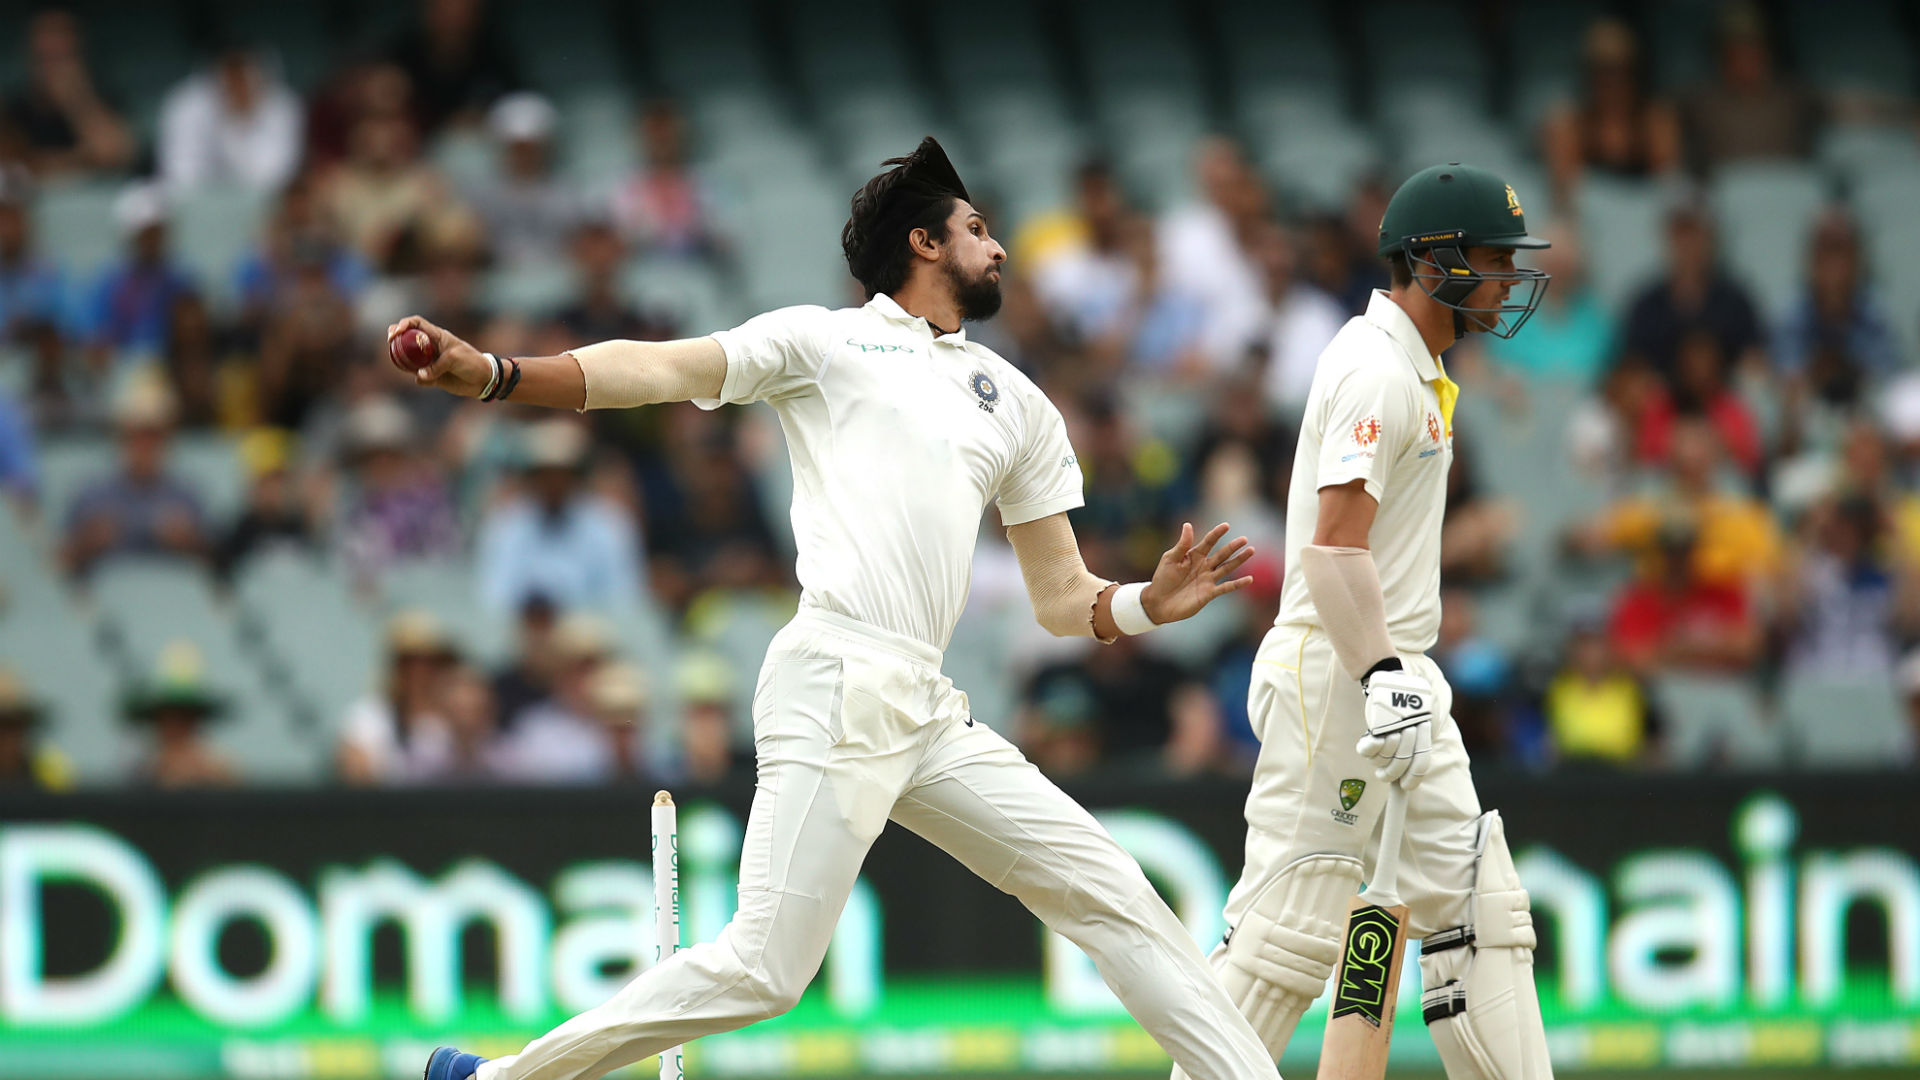 Aaron Finch survived when a replay showed Ishant Sharma overstepped, which Ricky Ponting says the umpires should be watching more closely.